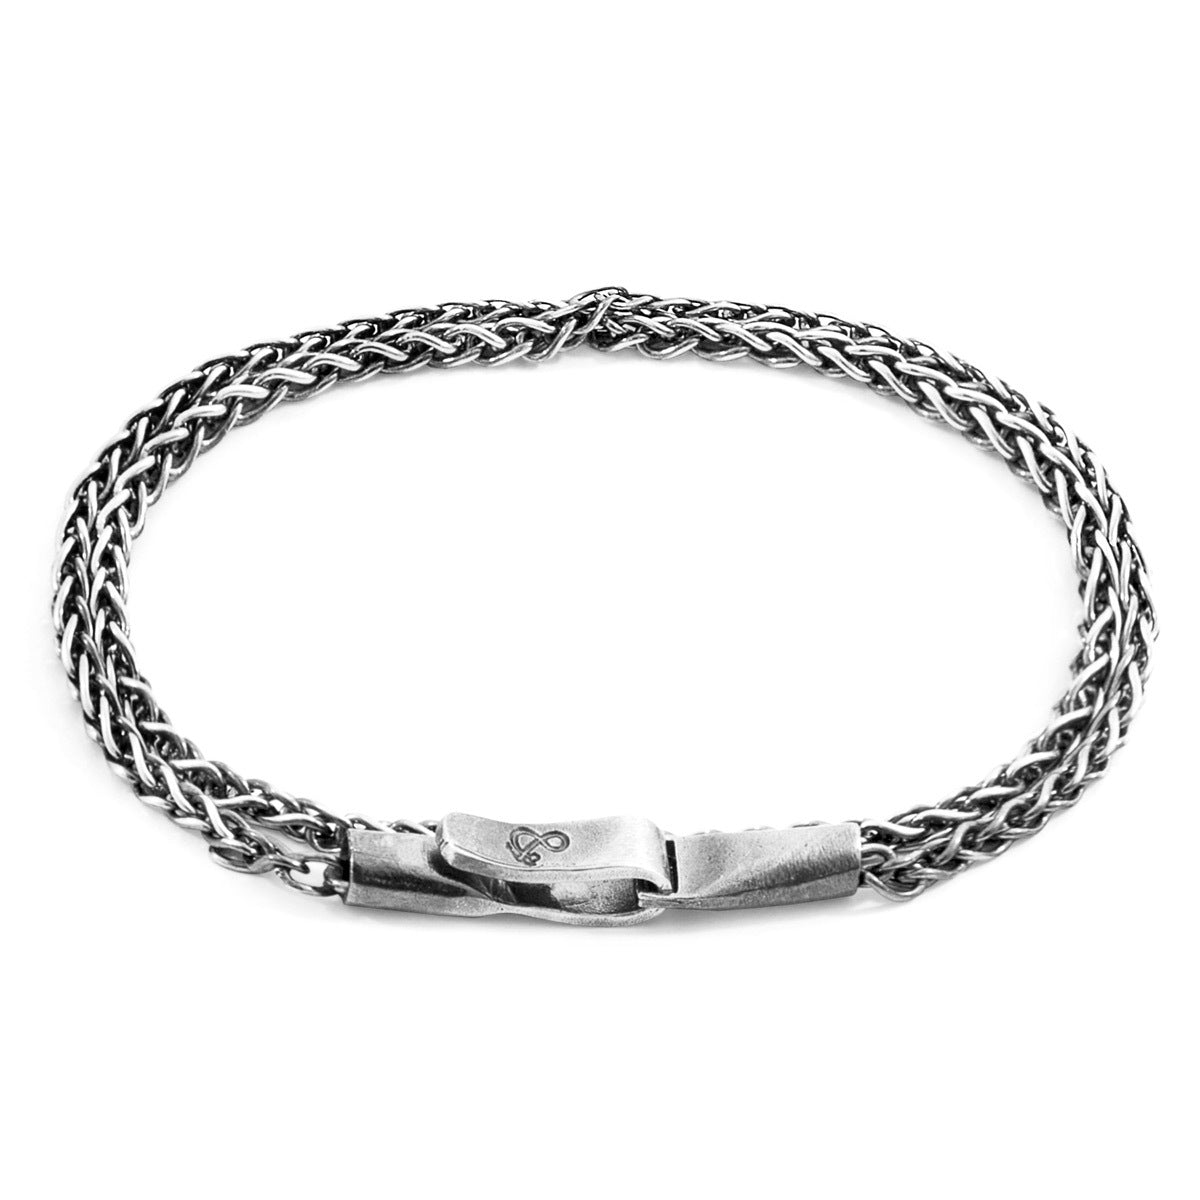 Staysail Double Sail Silver Chain Bracelet - Handcrafted in Great Britain with Solid .925 Sterling Silver Clasp and Hook - Available in 4 Sizes - Jewelry & Watches - Bijou Her -  -  - 